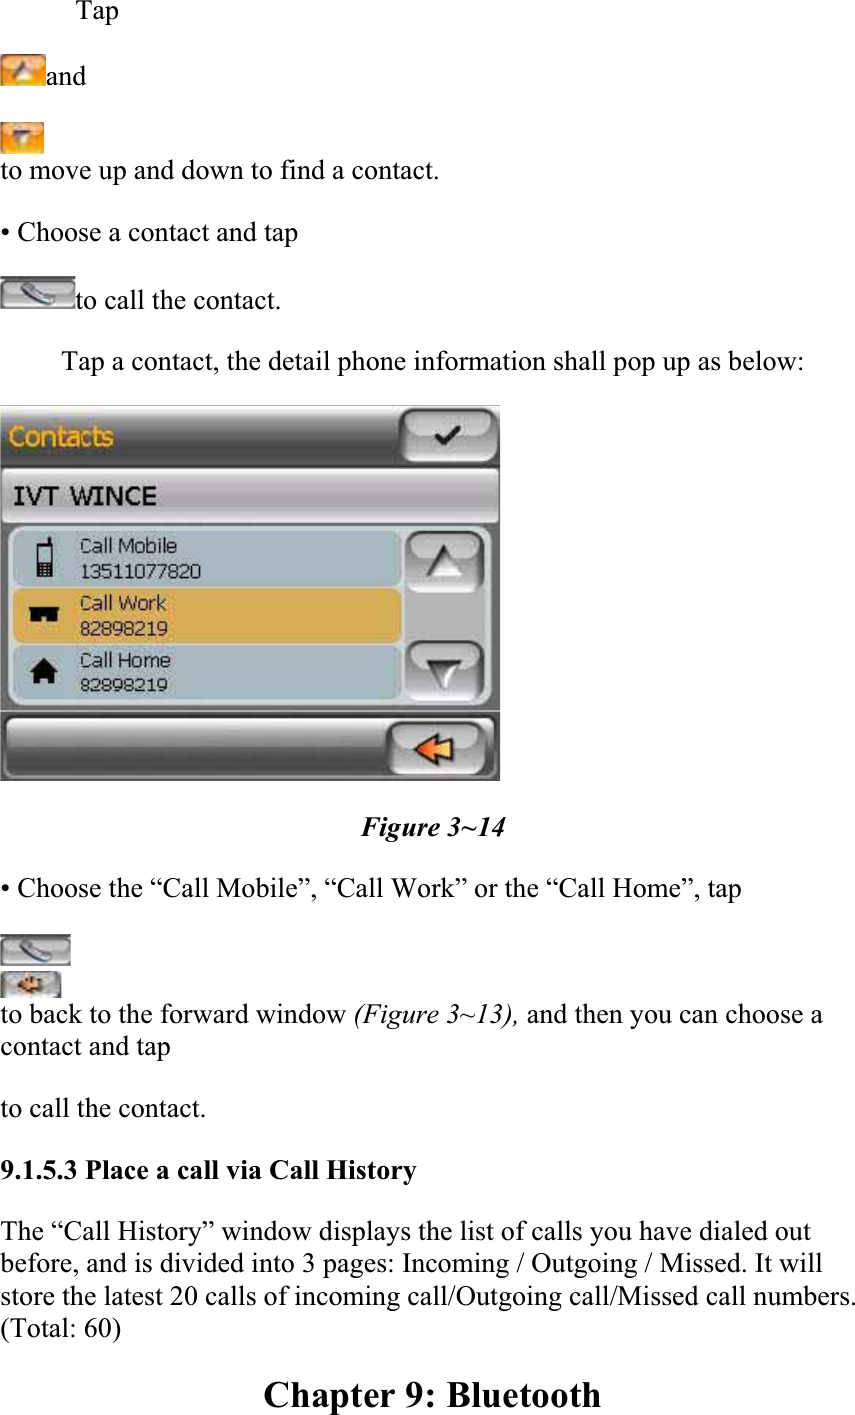 Tapandto move up and down to find a contact.  • Choose a contact and tap  to call the contact.Tap a contact, the detail phone information shall pop up as below:  Figure 3~14 • Choose the “Call Mobile”, “Call Work” or the “Call Home”, tap  to back to the forward window (Figure 3~13), and then you can choose a contact and tap  to call the contact.9.1.5.3 Place a call via Call HistoryThe “Call History” window displays the list of calls you have dialed out before, and is divided into 3 pages: Incoming / Outgoing / Missed. It will store the latest 20 calls of incoming call/Outgoing call/Missed call numbers. (Total: 60)  Chapter 9: Bluetooth 